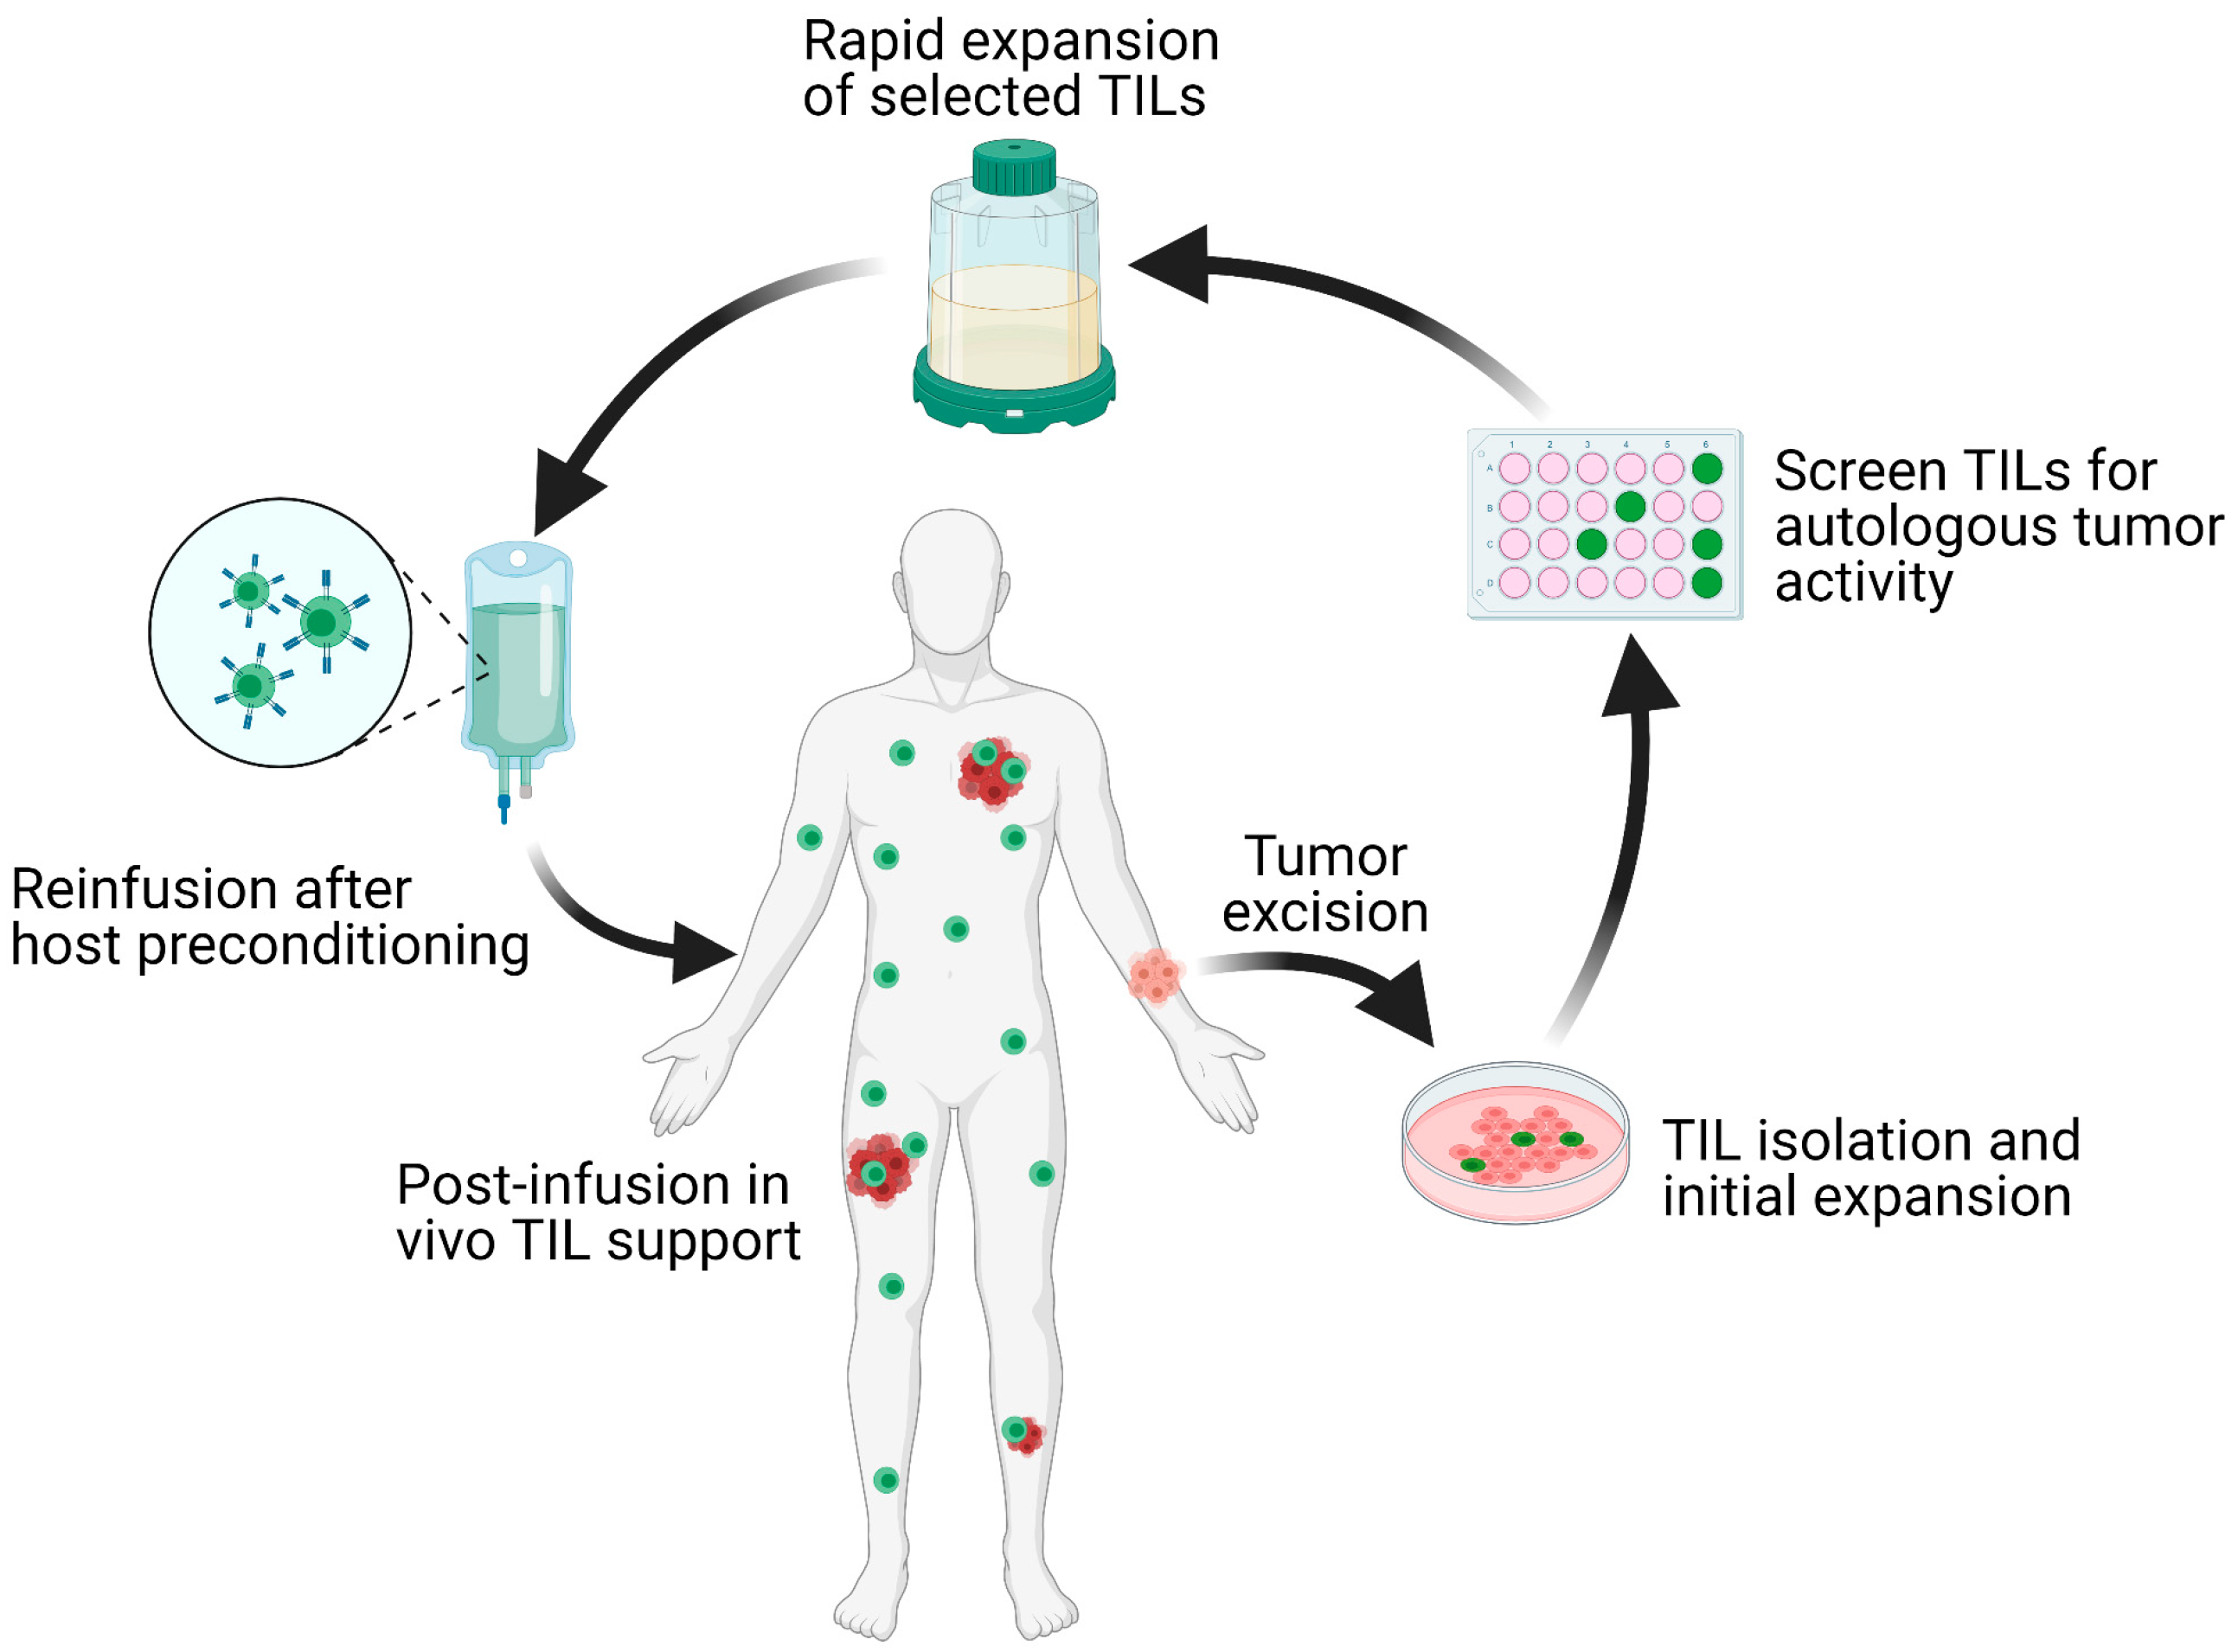 Schematic overview of the TIL-ACT protocol. Patients with metastatic tumors undergo metastasectomy of one lesion, which is then digested into multiple small tumor fragments or single cell suspensions. Tumor fragments are cultured with IL-2 in vitro for the initial TIL isolation and expansion. Isolated TILs are screened for tumor reactivity via co-culture with autologous digested tumor cells for IFN-γ secretion as assessed by IFN-γ ELISA. Tumor-specific TIL clones are then consolidated and rapidly expanded in the presence of anti-CD3 monoclonal antibody, IL-2, and irradiated autologous feeder cells. Once the number of TILs has reached treatment levels (typically > 1 × 10^10 cells), they are harvested and transferred back into a lymphodepleted host in one infusion. Credit: ACT Therapy for Solid Tumors, Scholarly Community Encyclopedia, https://encyclopedia.pub/entry/9312 (CC BY 4.0).